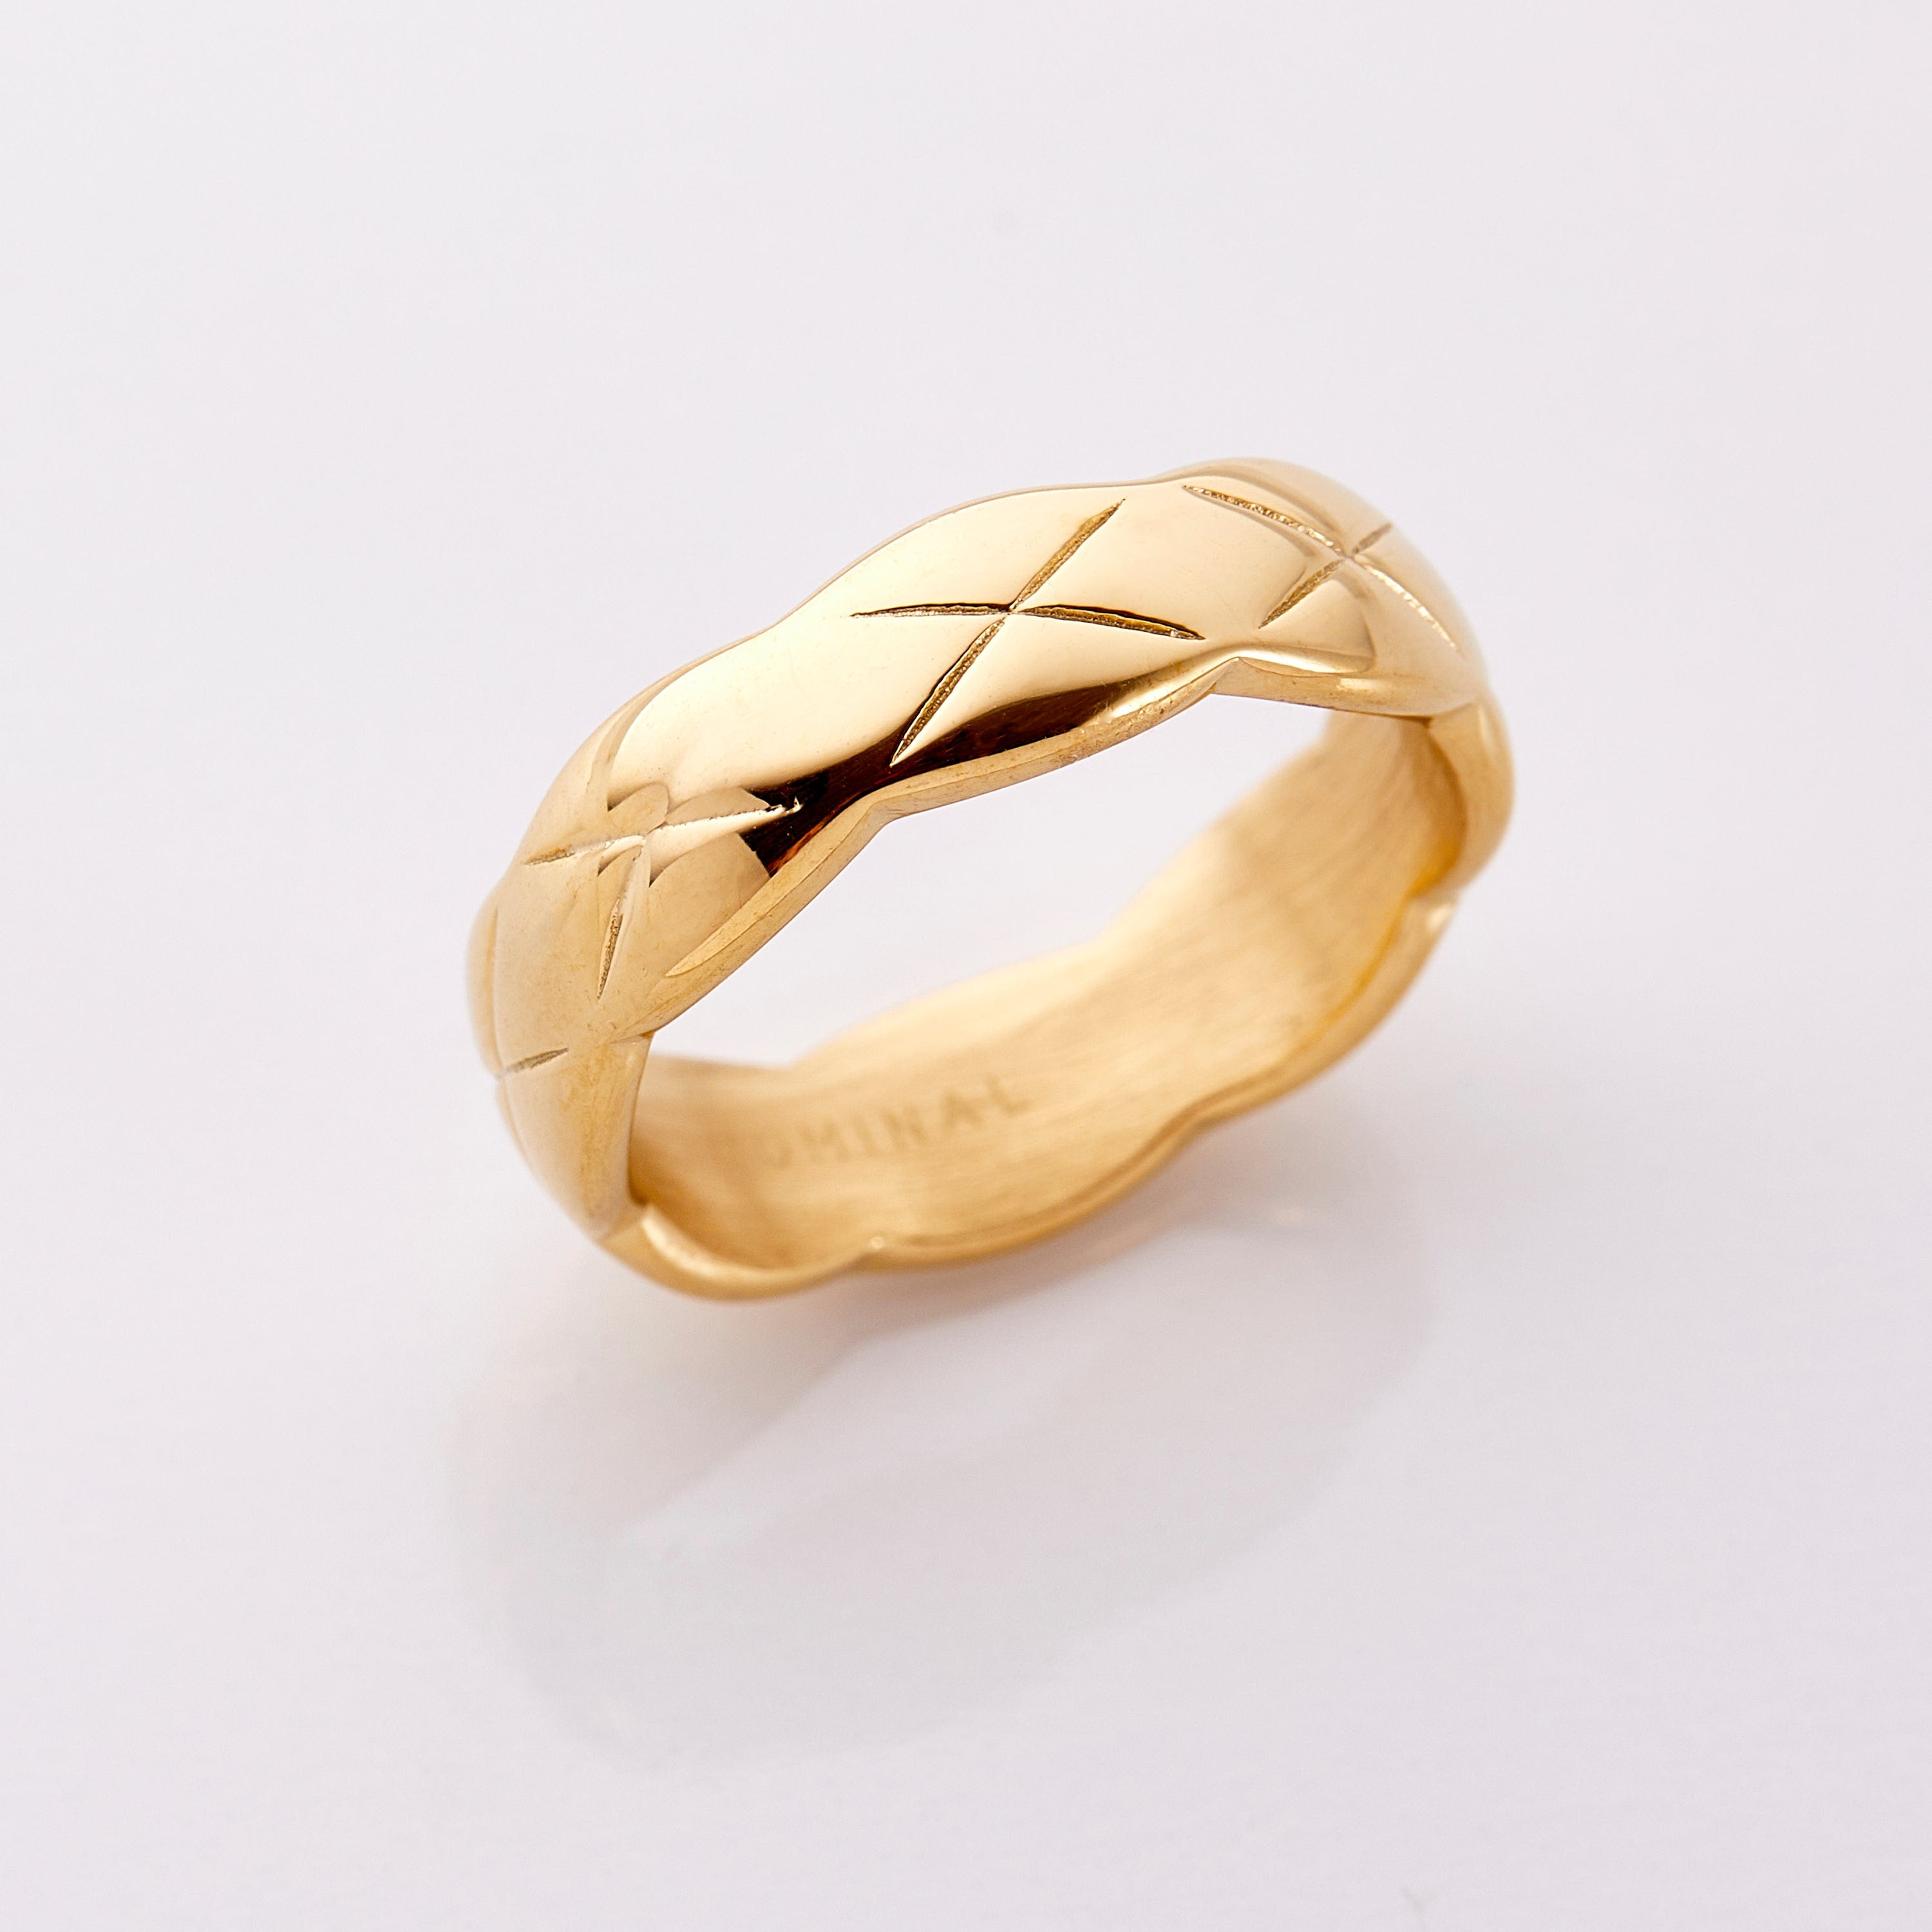 Coco Crush Ring (Finger Size: 53, Metal: 18K Yellow Gold)